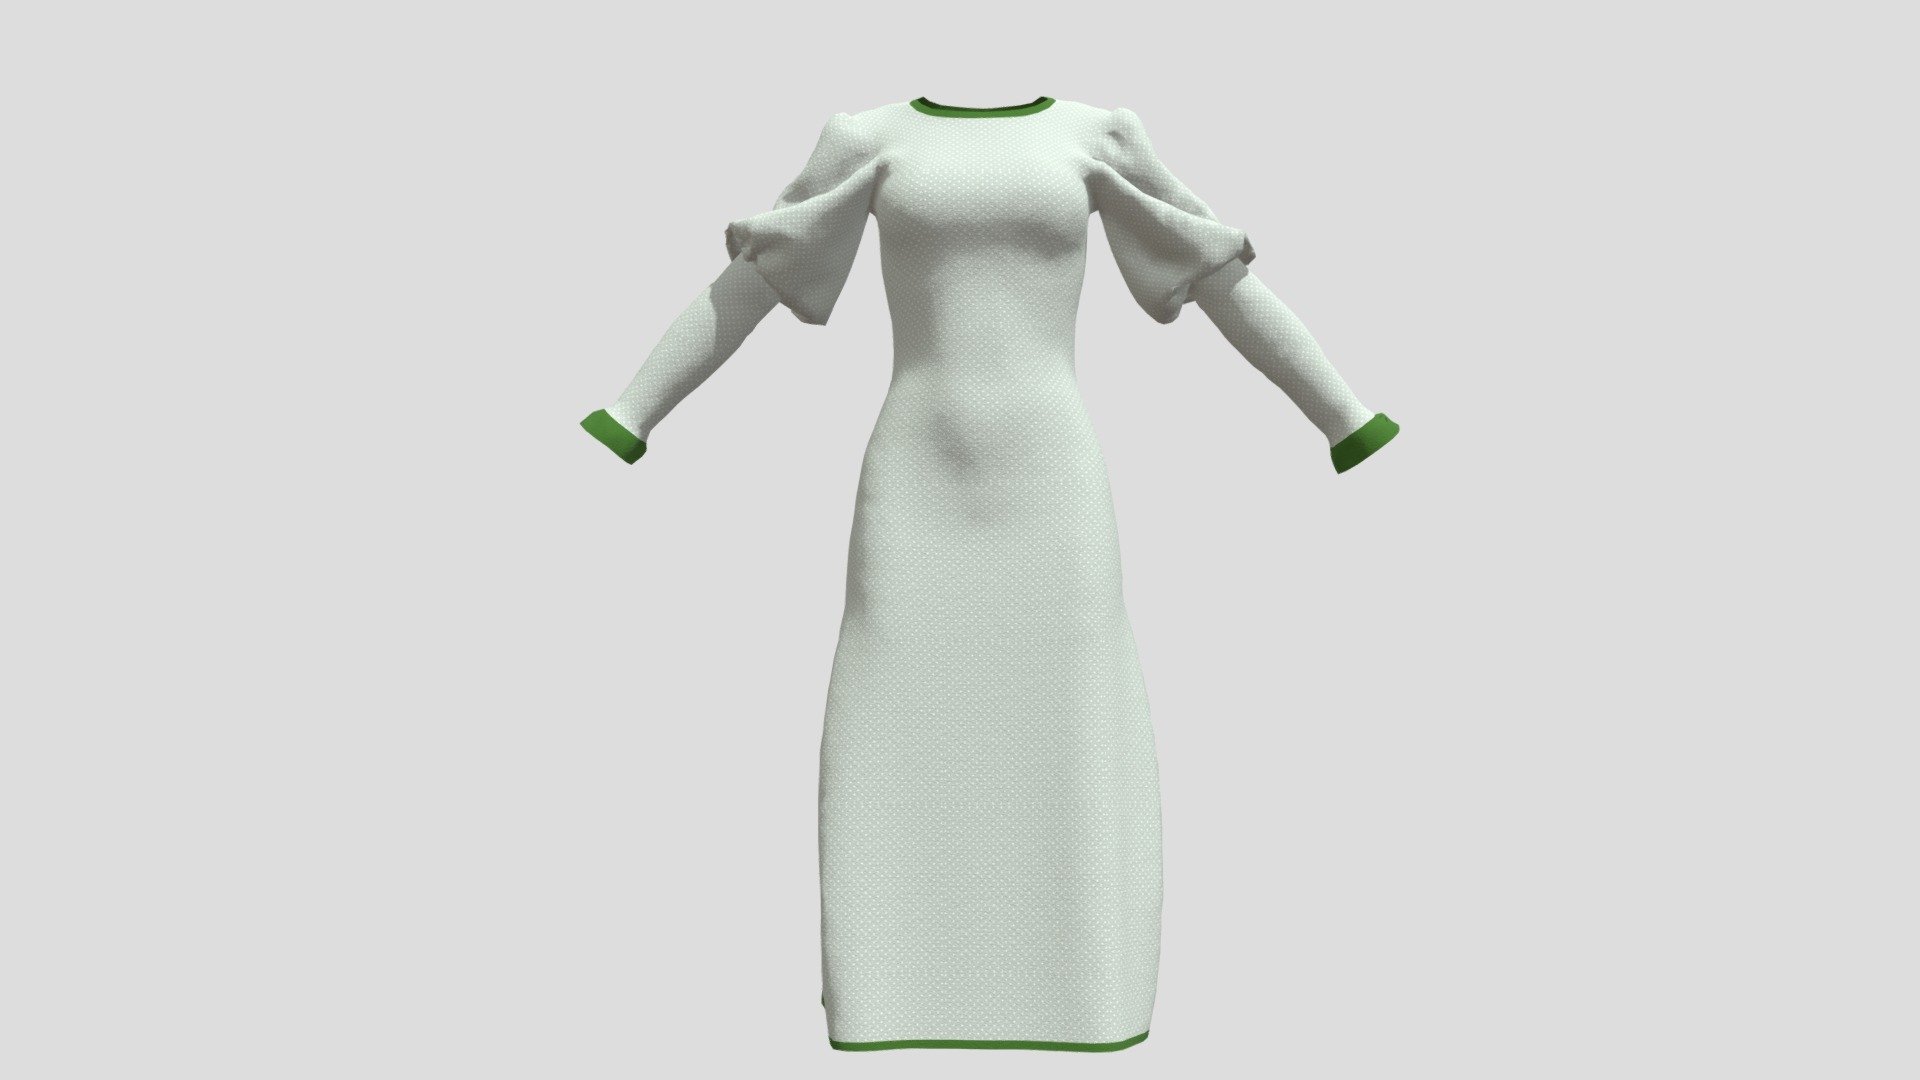 A kind of bell-sleeves that can decorate shoulder and arm.

The dress was easily realized by Marvelous Designer 7. If you buy the model, you can aquire the .Zpac file of the dress. You can use the .Zpac file to resize the size of garment for your avatar. But, the ancedence is that you have Marvelous Designer 3d model